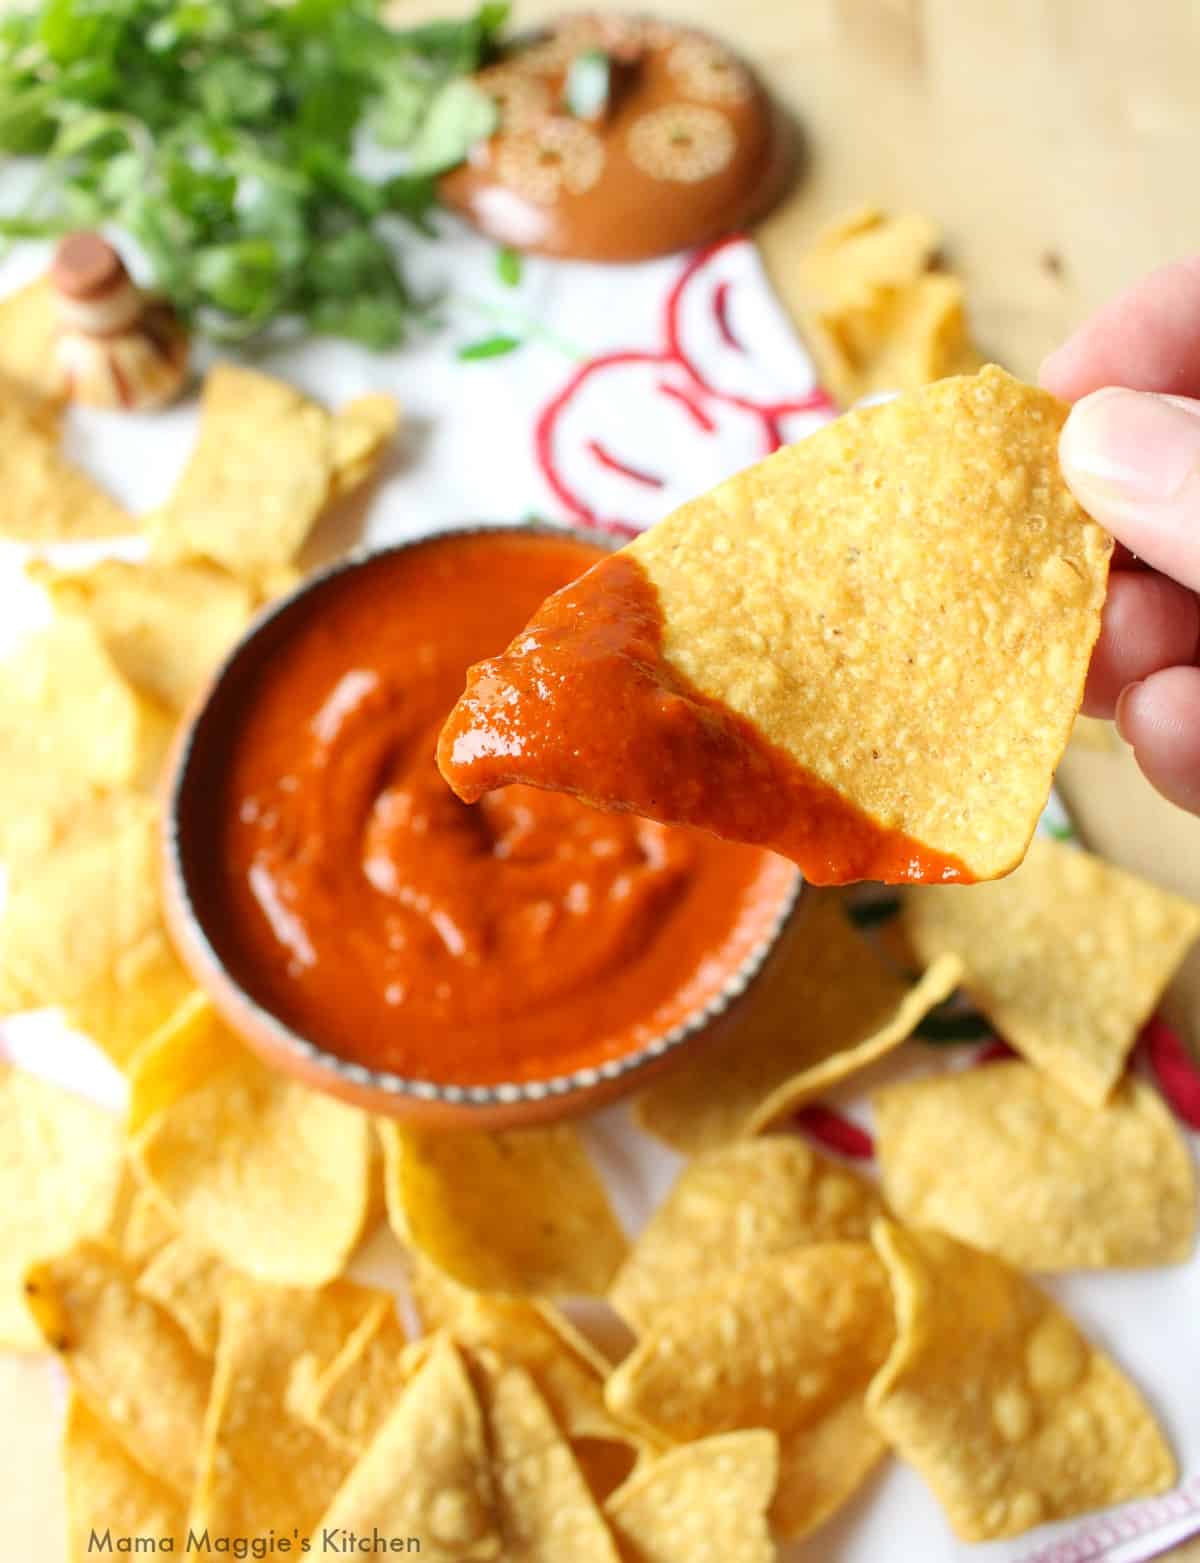 A hand holding a chip with cascabel salsa.